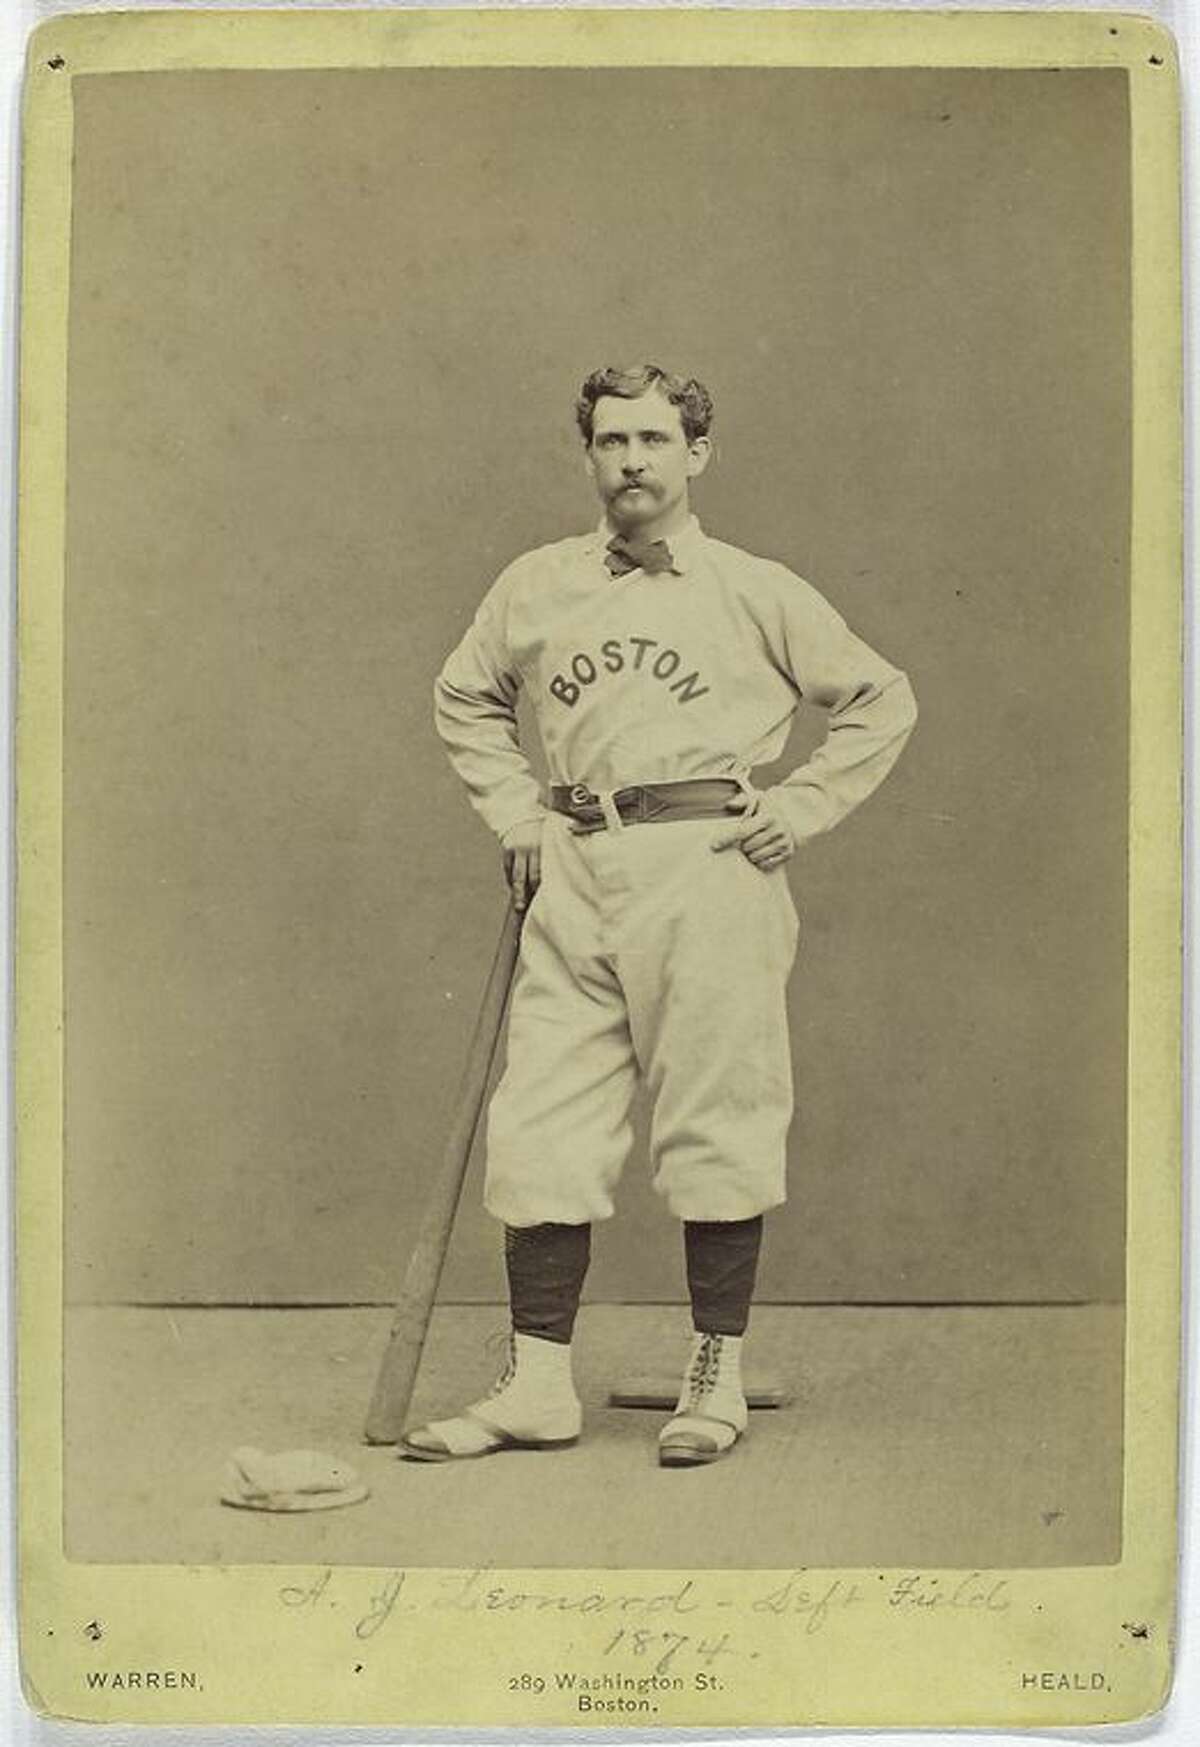 After one season with the Olympics, Andy Leonard played seven seasons with the Boston Red Stockings, helping the team win six pennants. The Red Stockings eventually became the Boston Braves, the team that exists today as the Atlanta Braves.